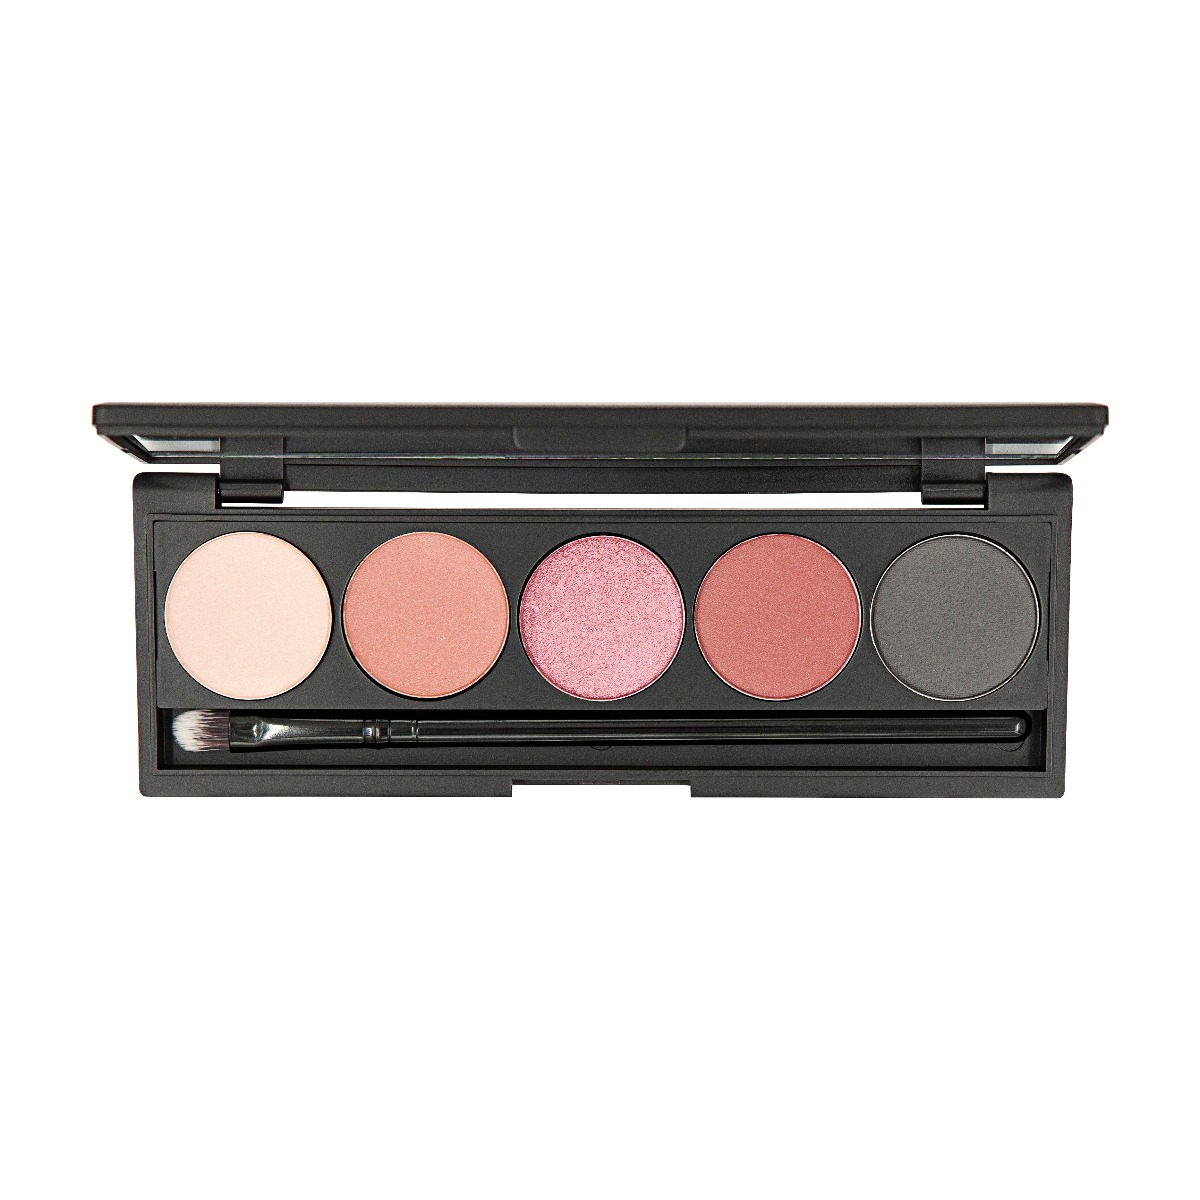 Private-Label-Eyeshadow-Palette-5-Well